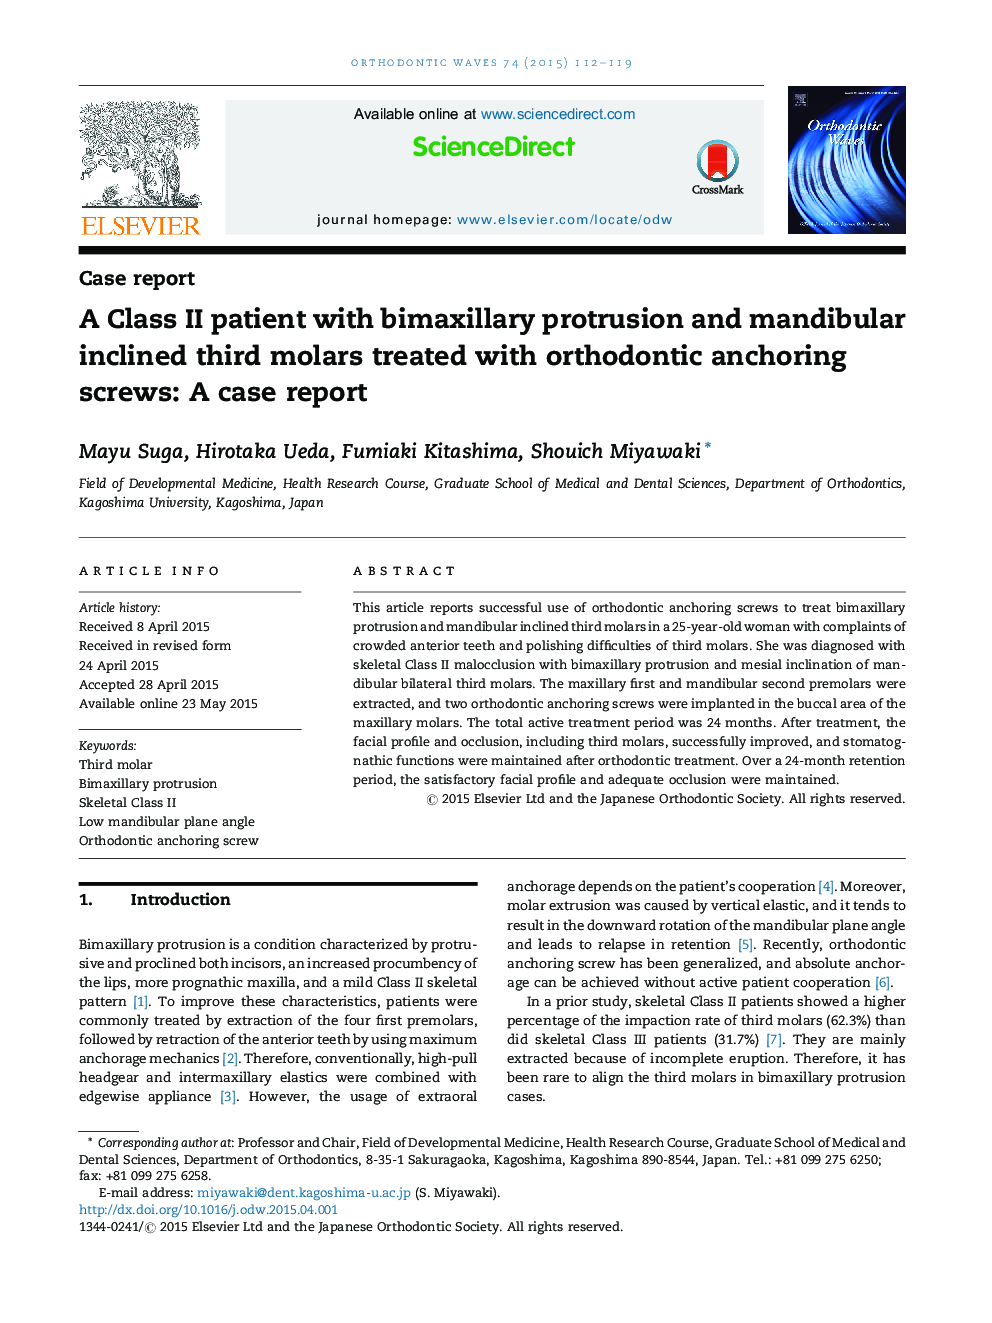 A Class II patient with bimaxillary protrusion and mandibular inclined third molars treated with orthodontic anchoring screws: A case report